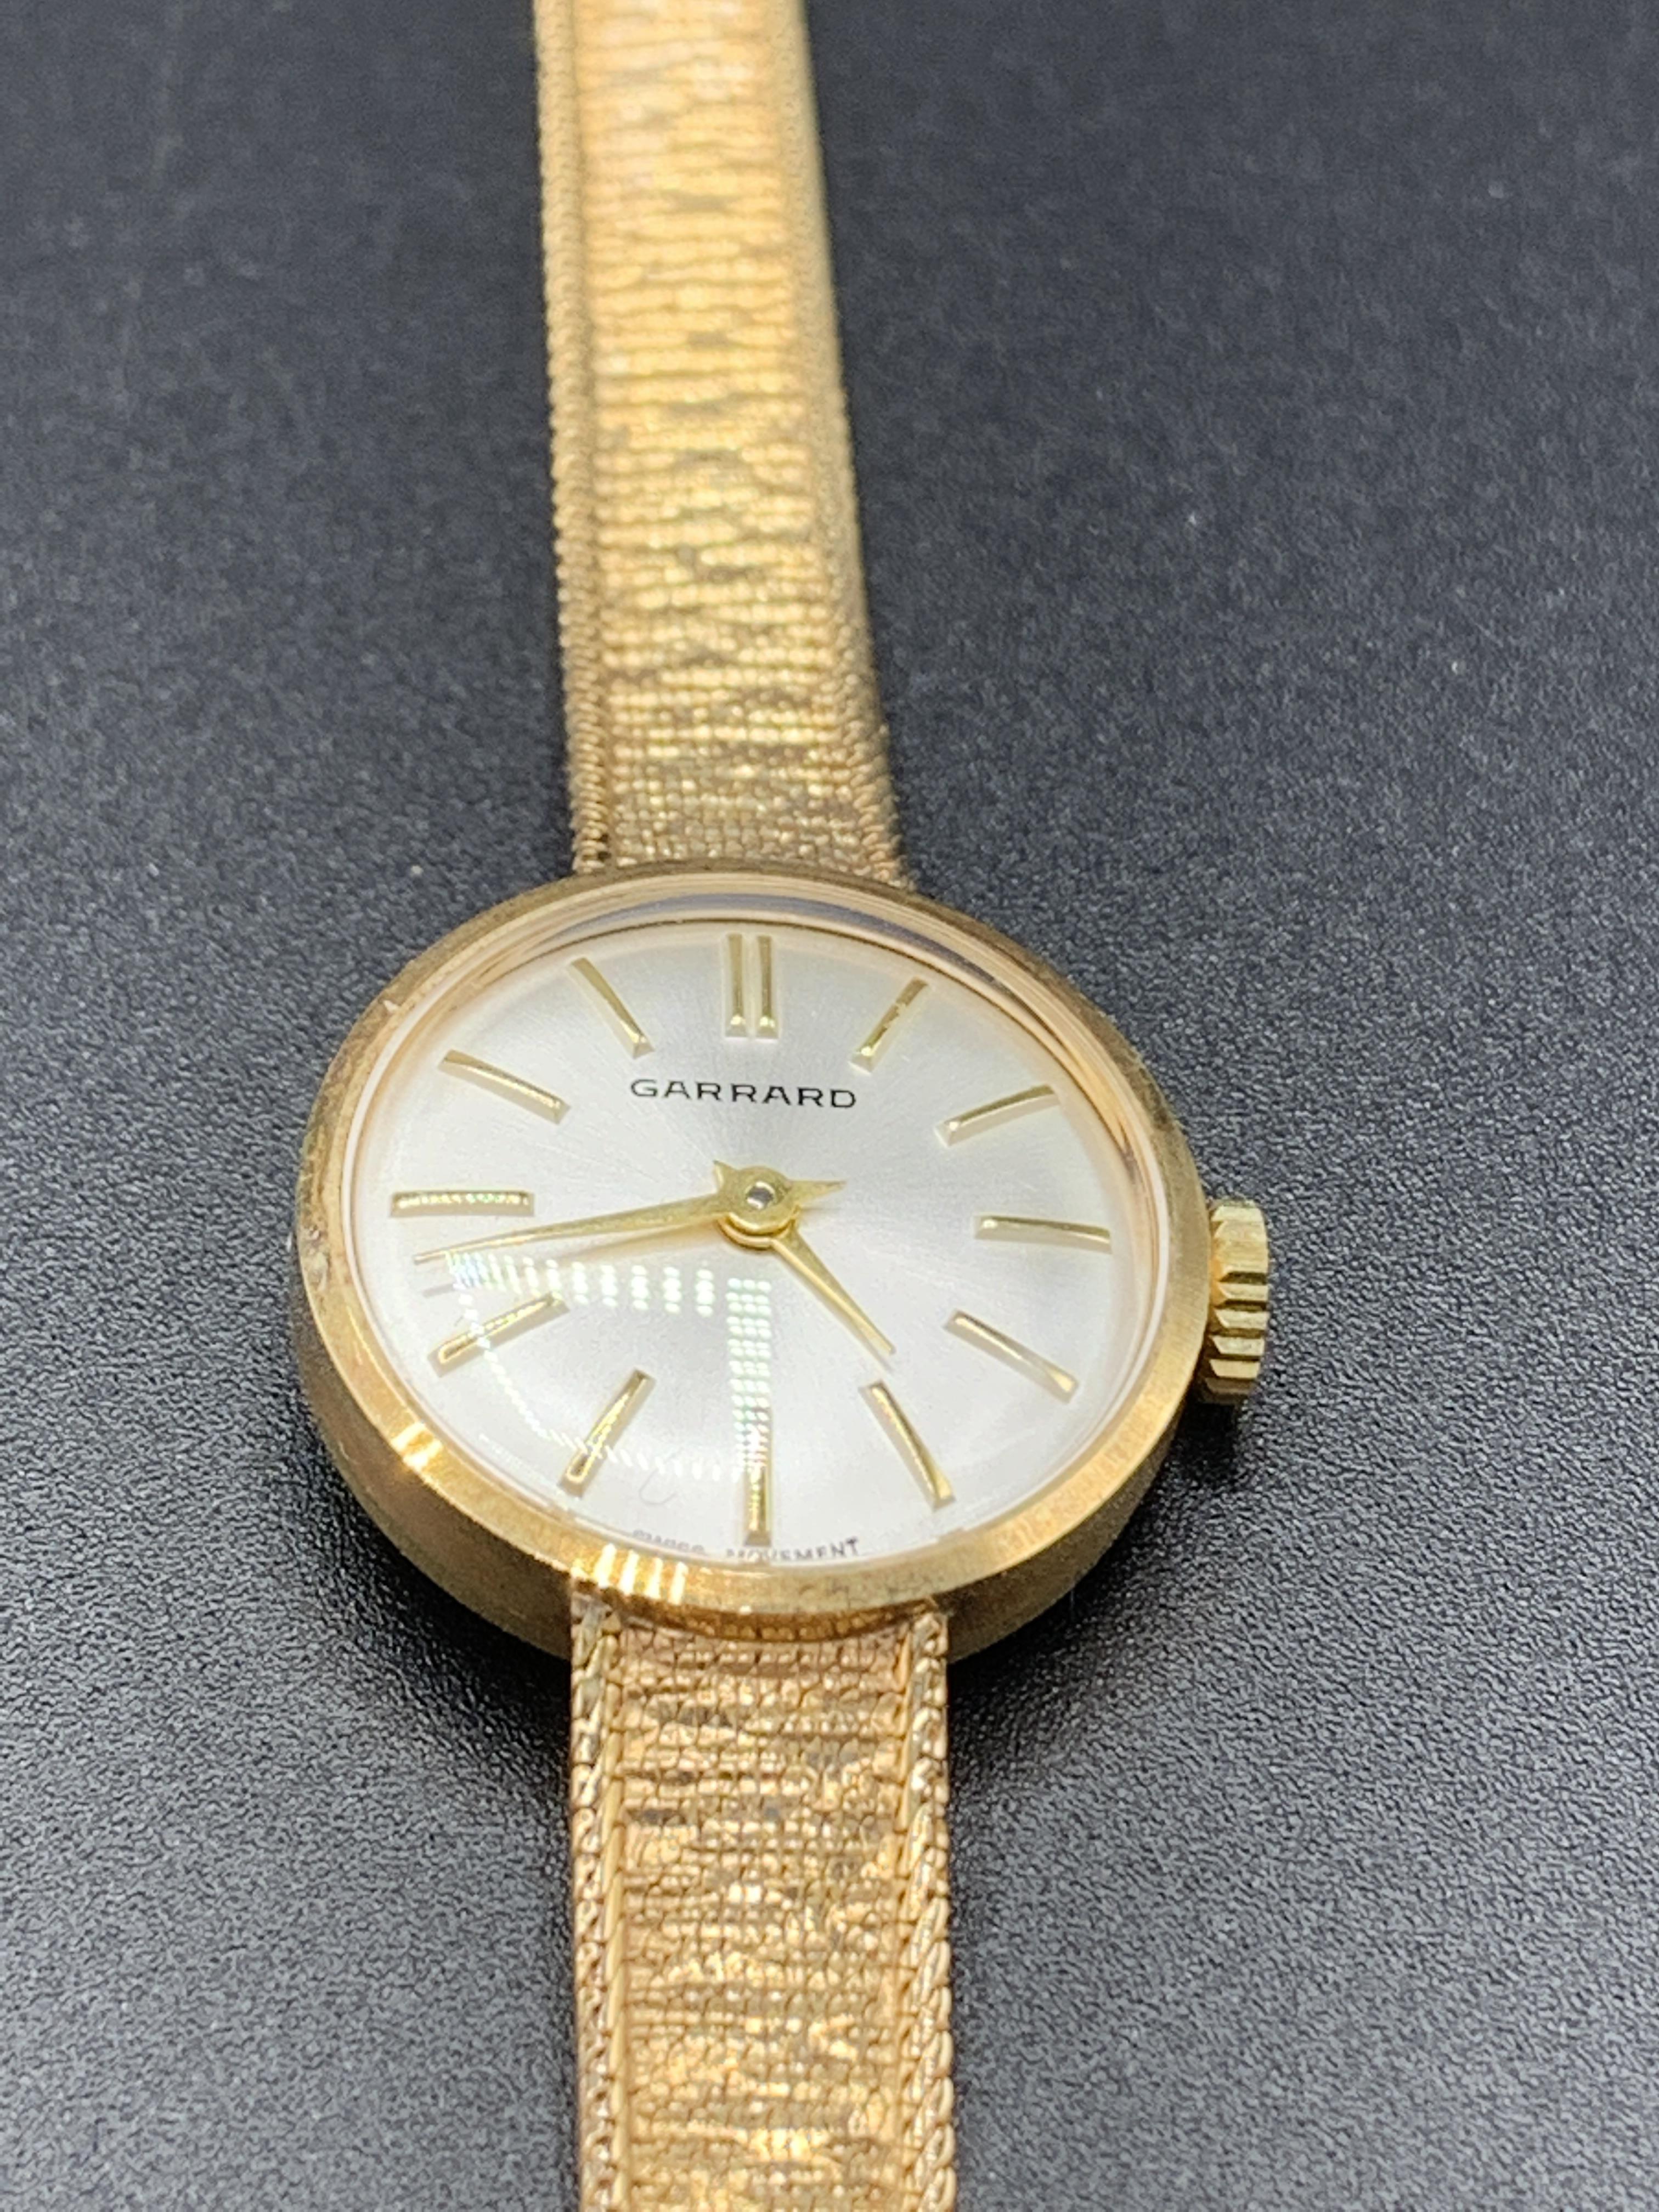 9ct gold case cocktail watch by Garrard on 9ct gold strap - Image 2 of 5